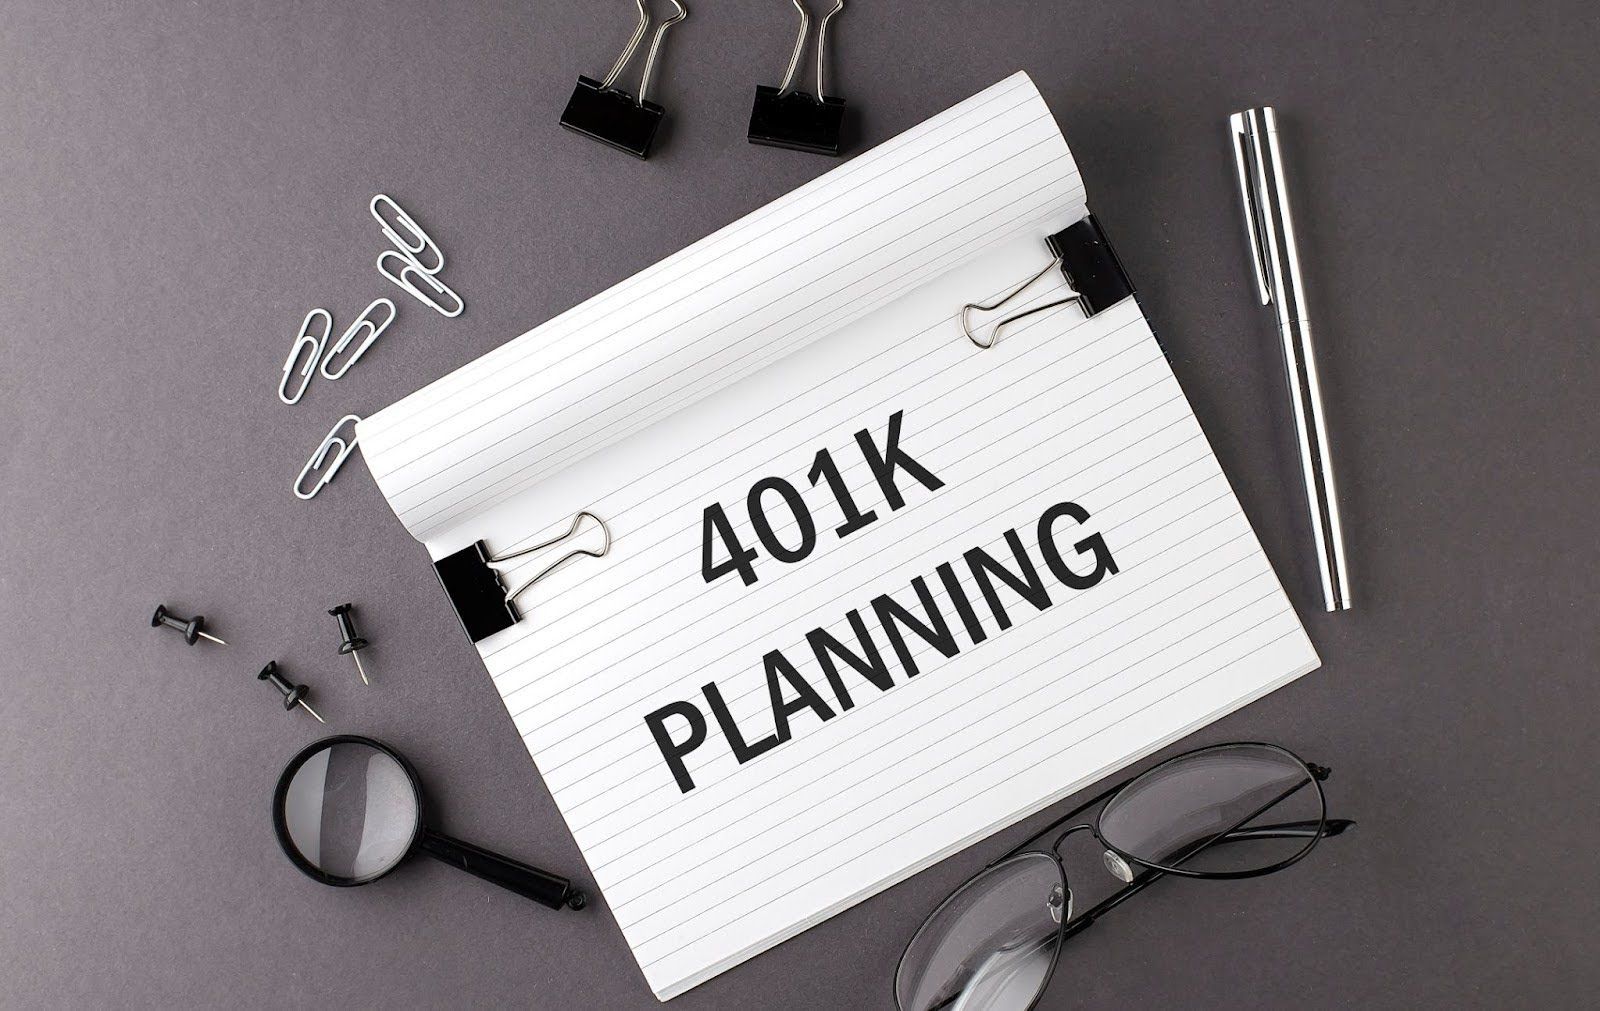 Notepad printed with "401K PLANNING," against a gray backdrop